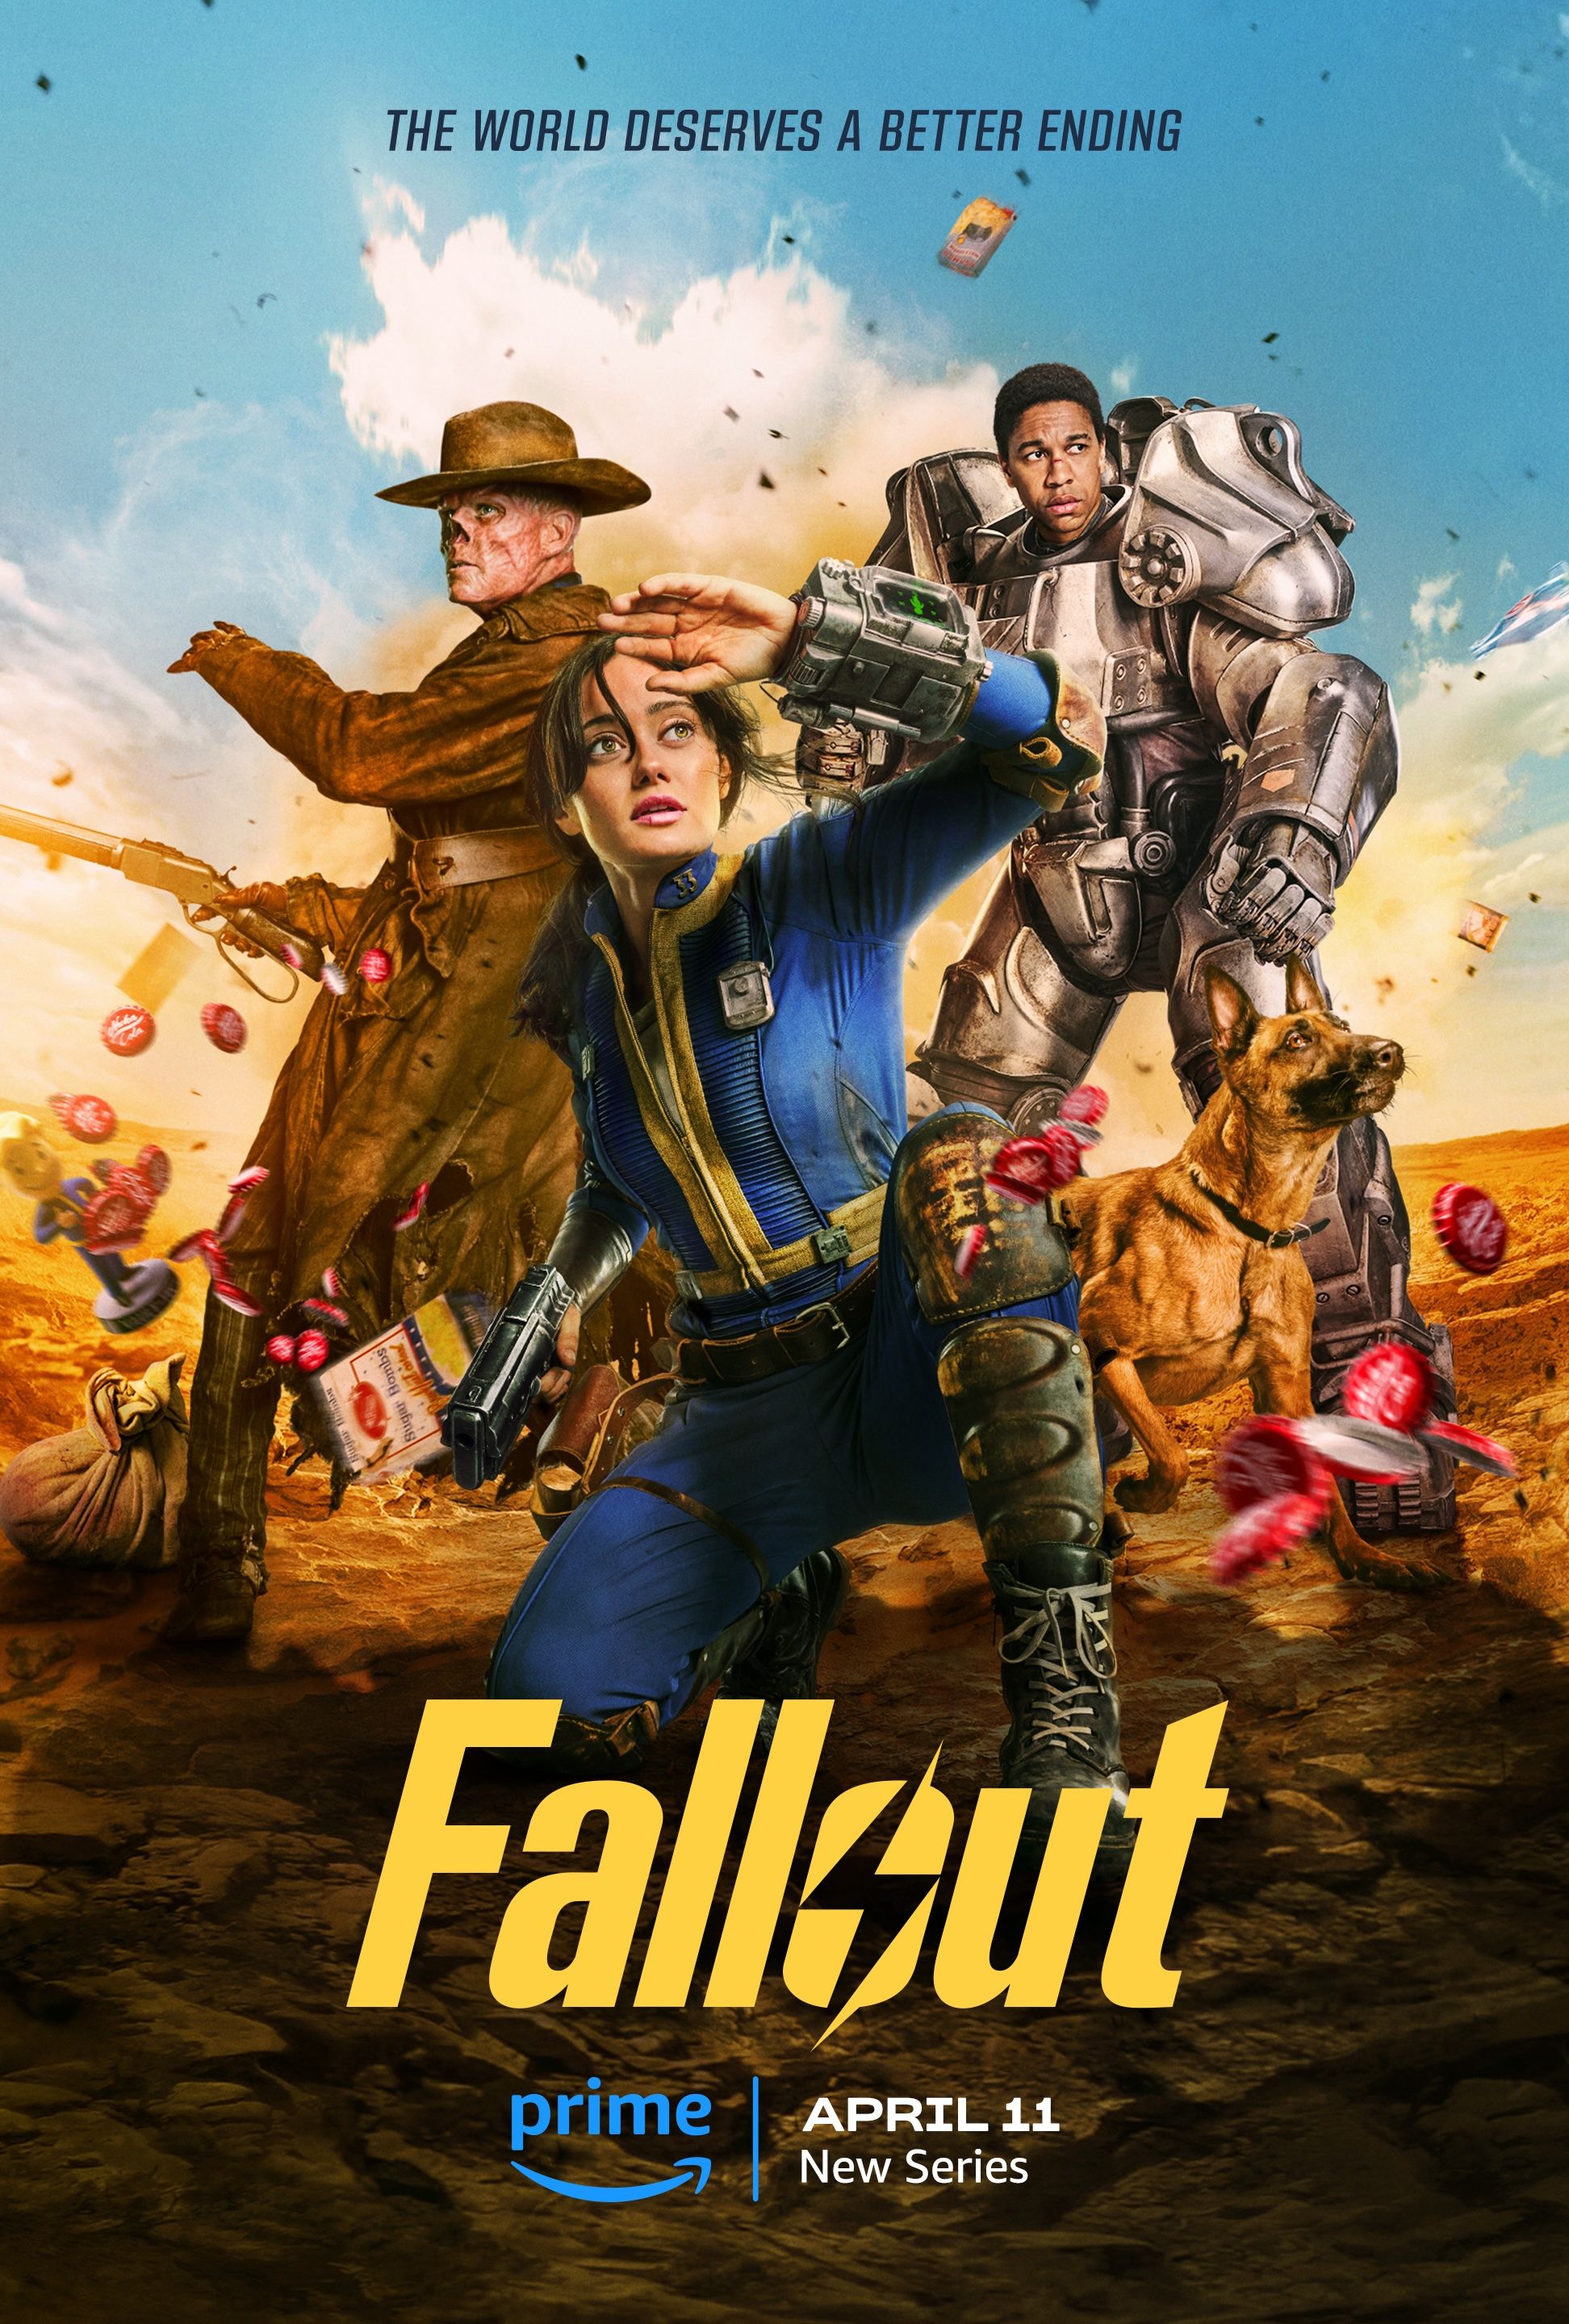 Fallout TV show poster showing Lucy, CX404, Ghoul and Maximus in front of an explosion with flying bottle caps